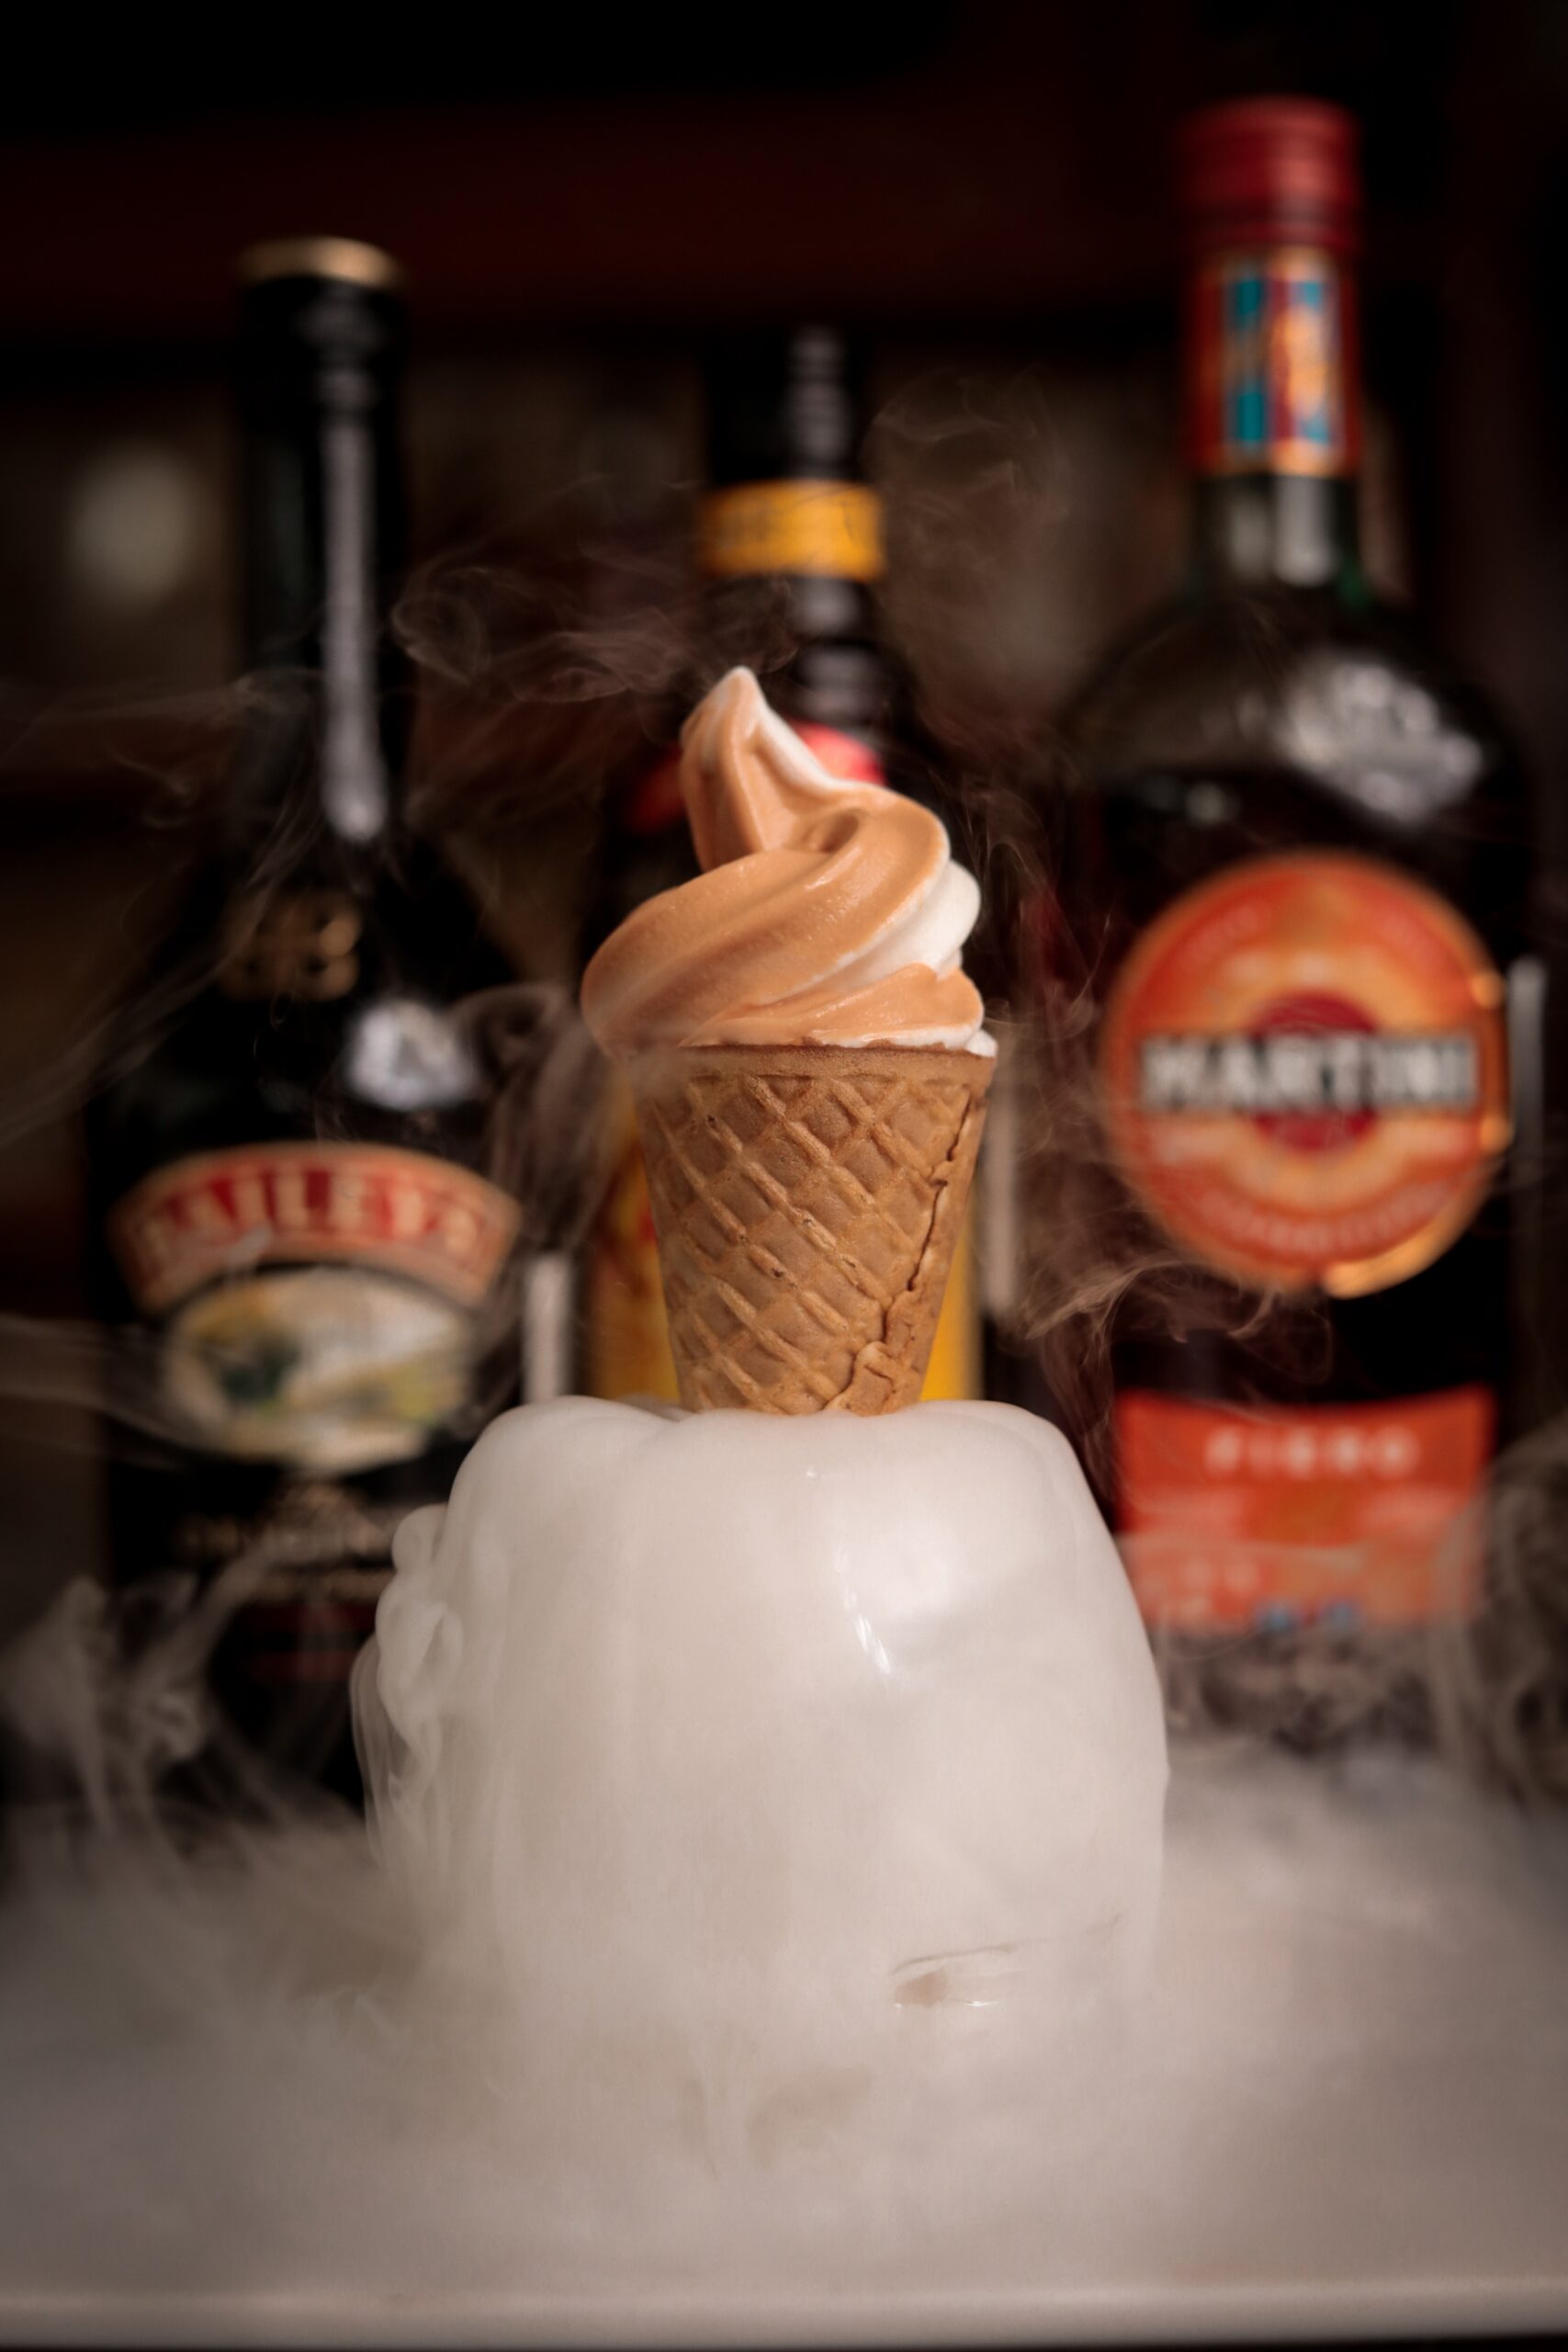  Lets-swirl-up-a-Happy-High-with-‘Alco-Soft-at-DoubleTree-by-Hilton-Goa-Panaji